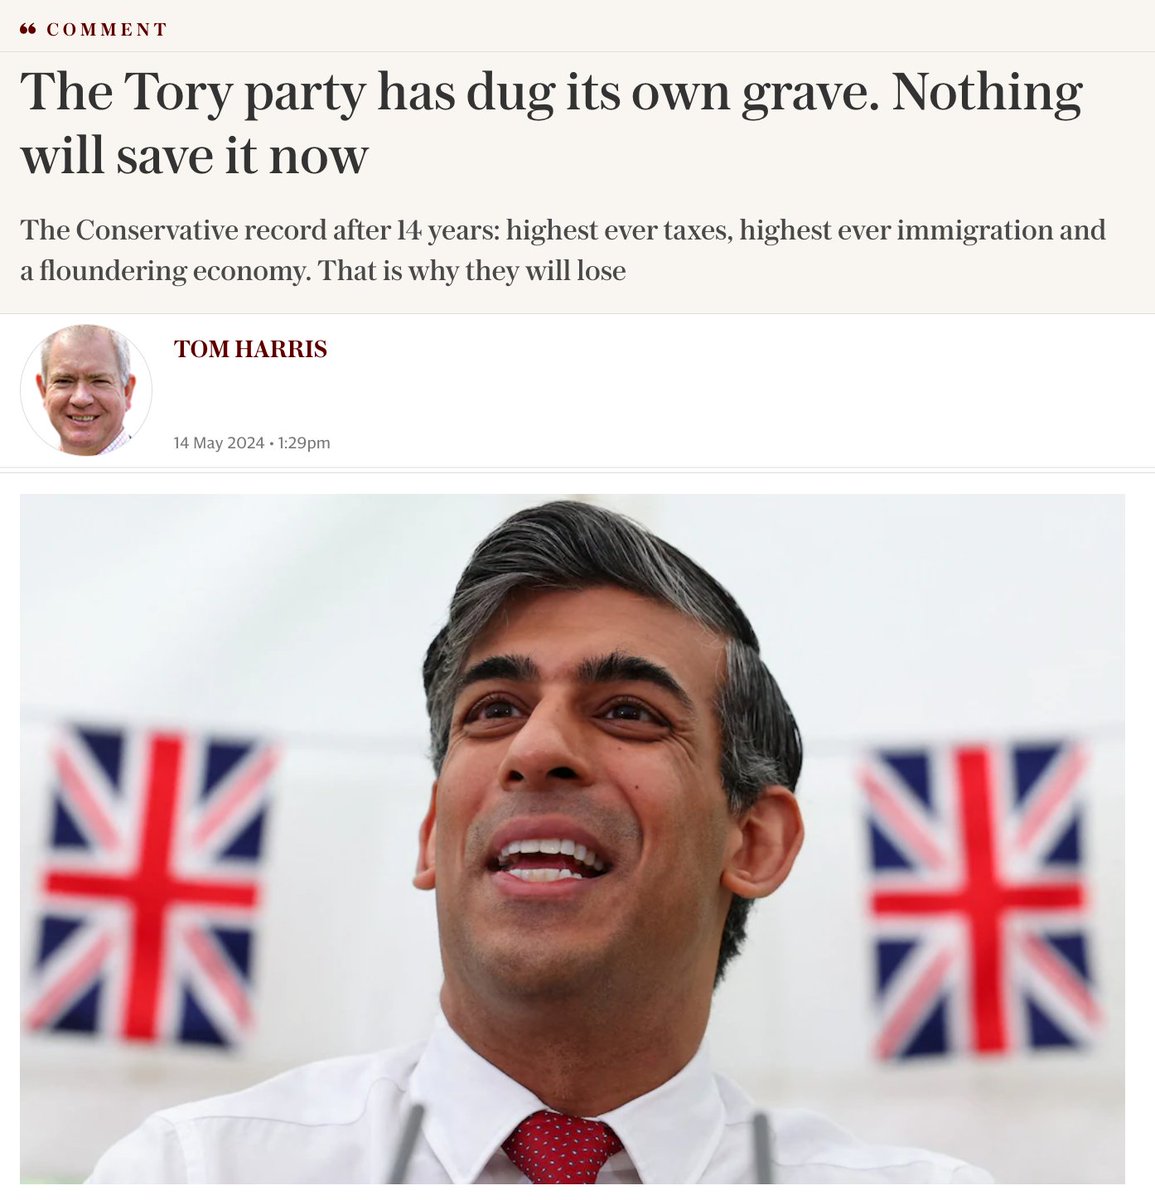 'The Tory party has dug its own grave. Nothing will save it now' Read all about tory decline in... *checks notes* the Telegraph?!